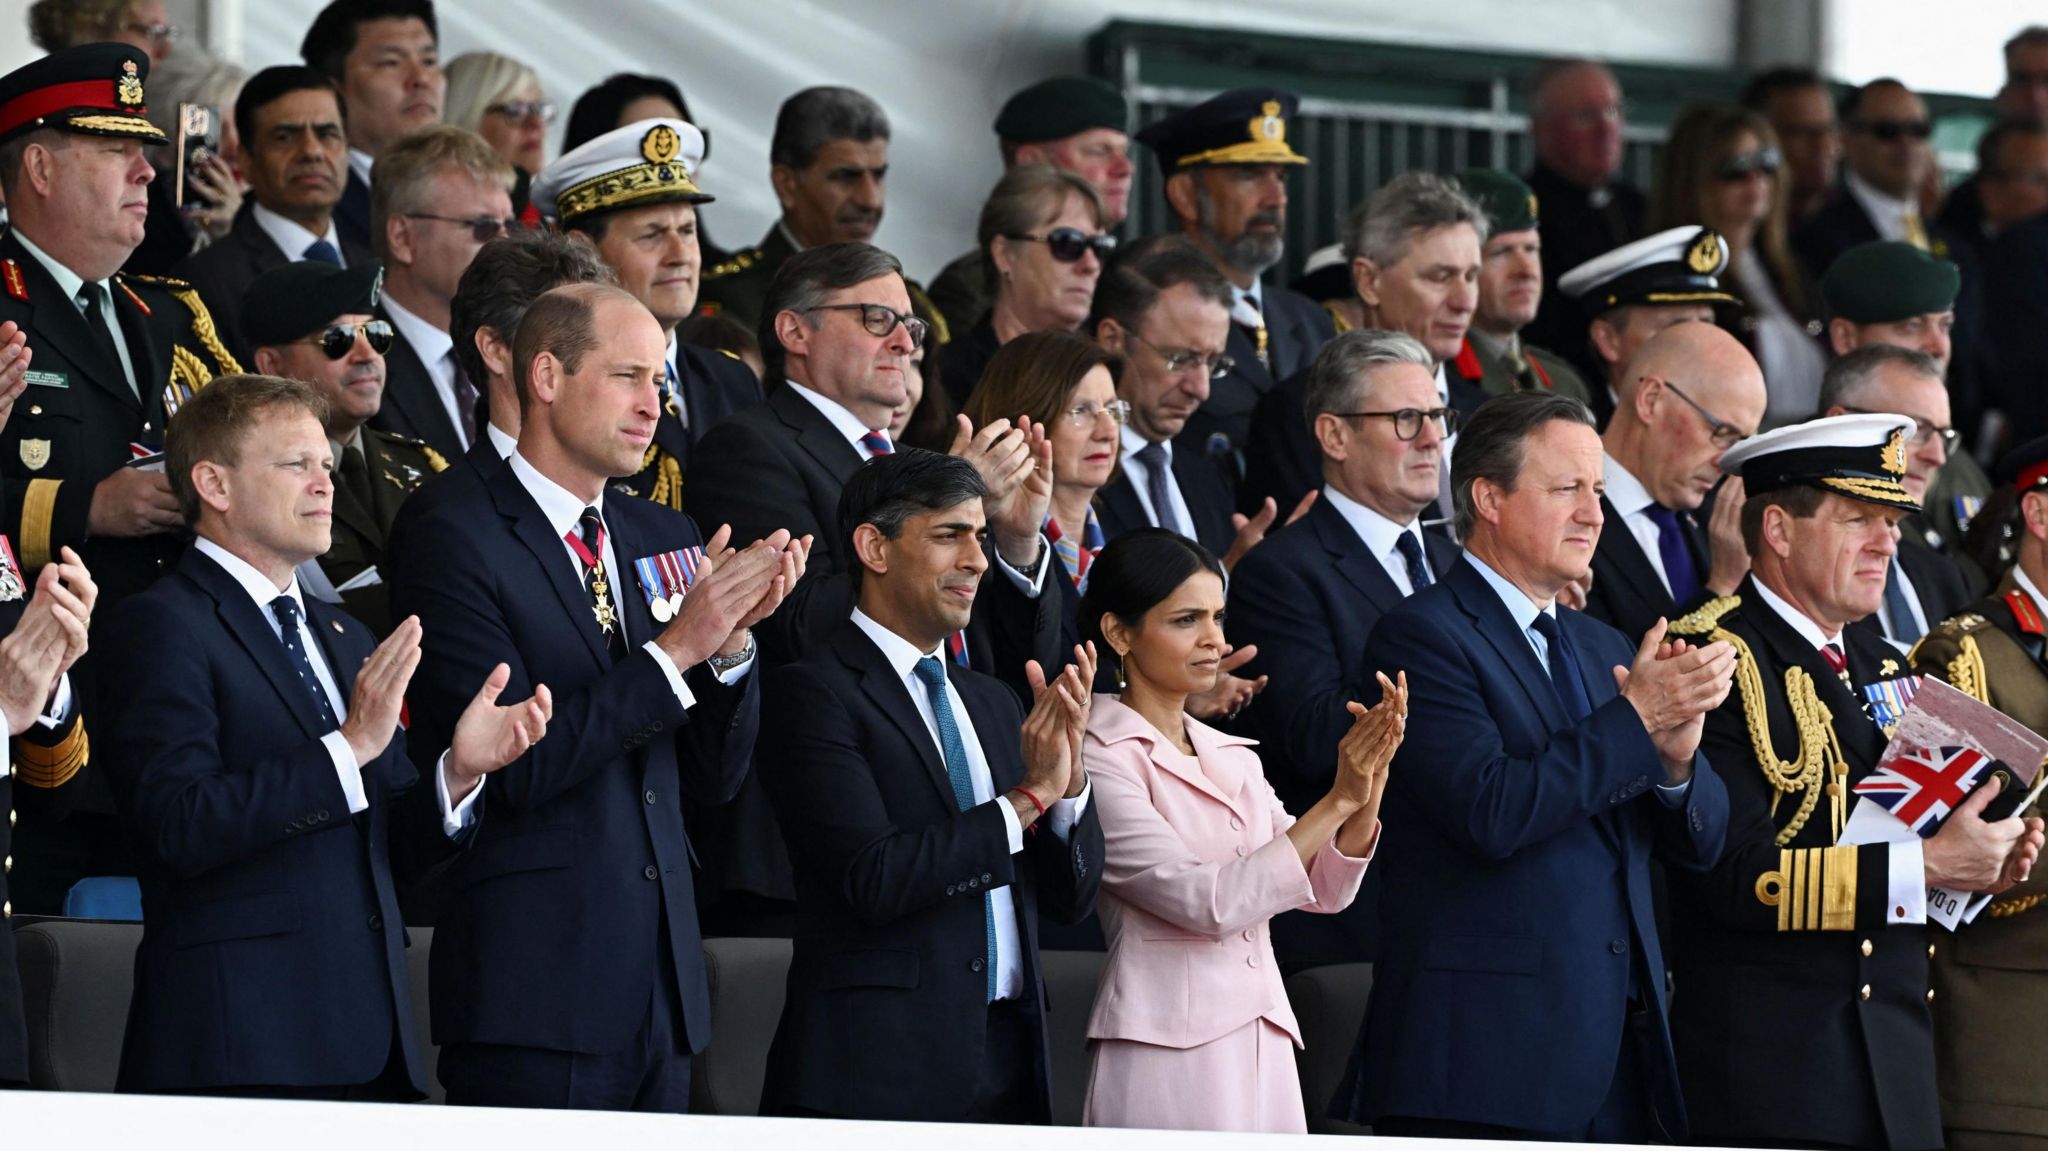 Secretary of State for Defence Grant Shapps, the Prince of Wales, Prime Minister Rishi Sunak and his wife Akshata Murty, Labour Party leader Sir Keir Starmer and Foreign Secretary Lord David Cameron in the crowd applauding at the event in Southsea